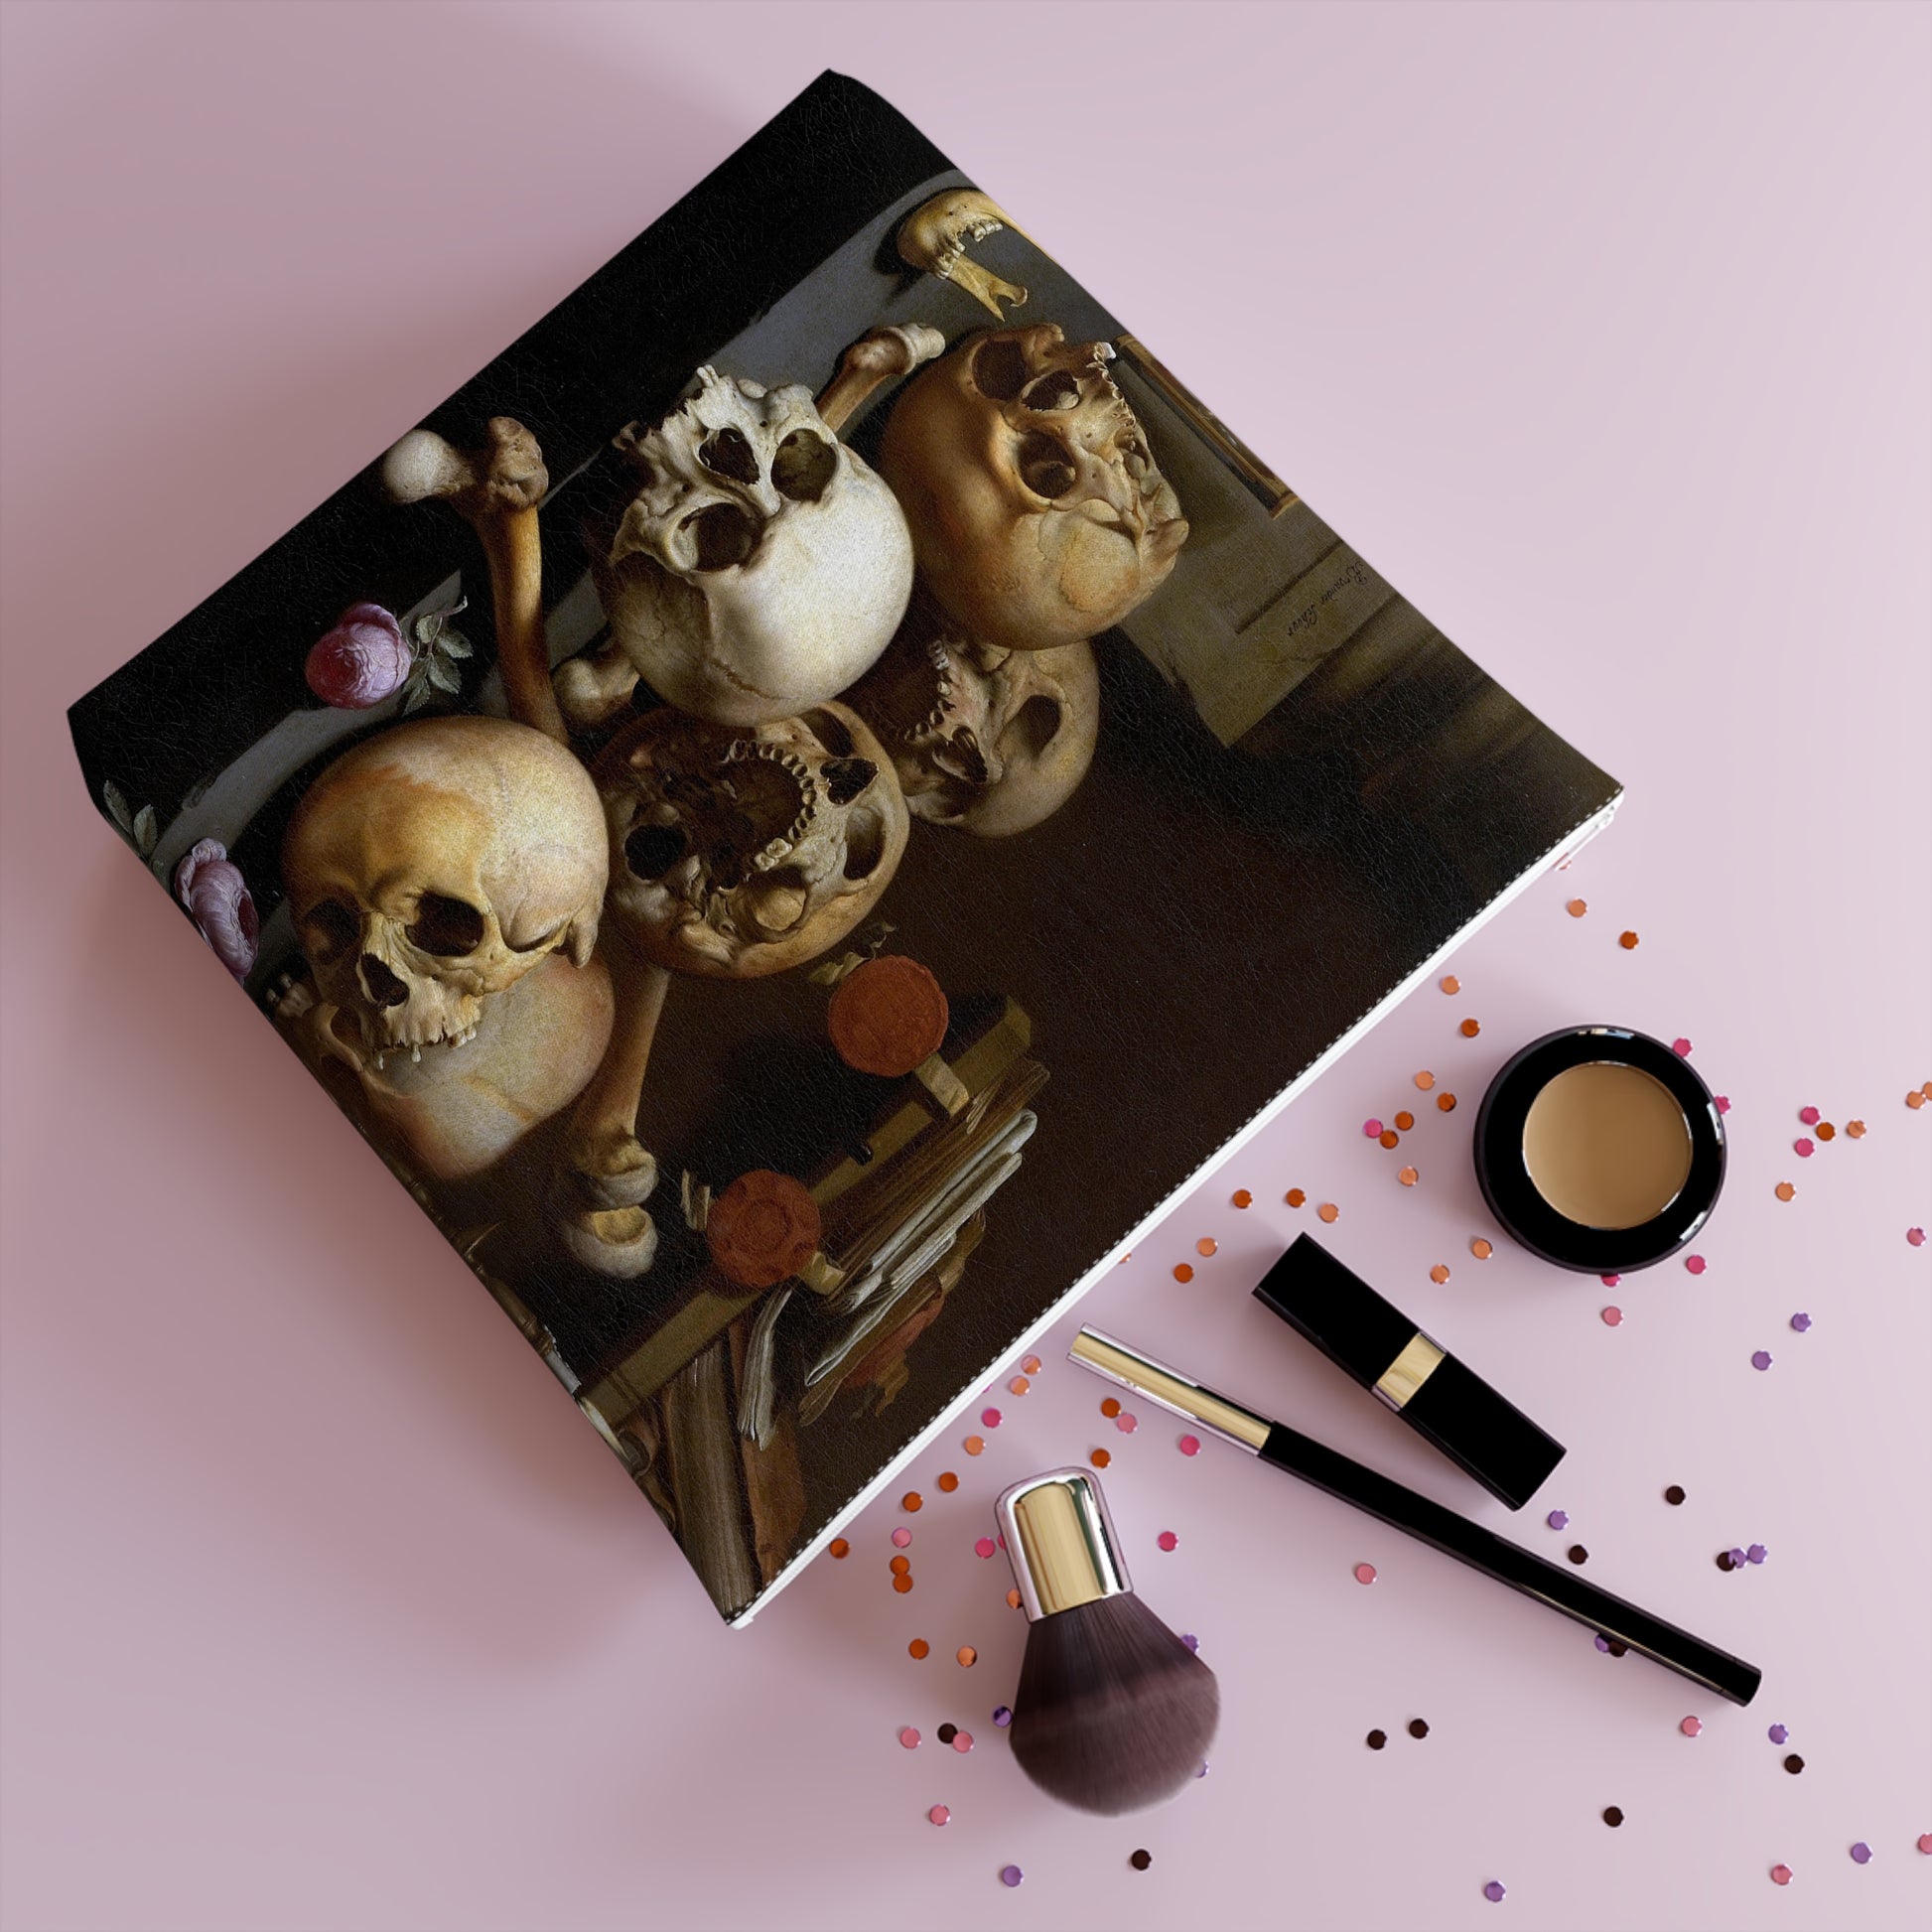 a picture of a group of skulls on a table next to a bottle of makeup